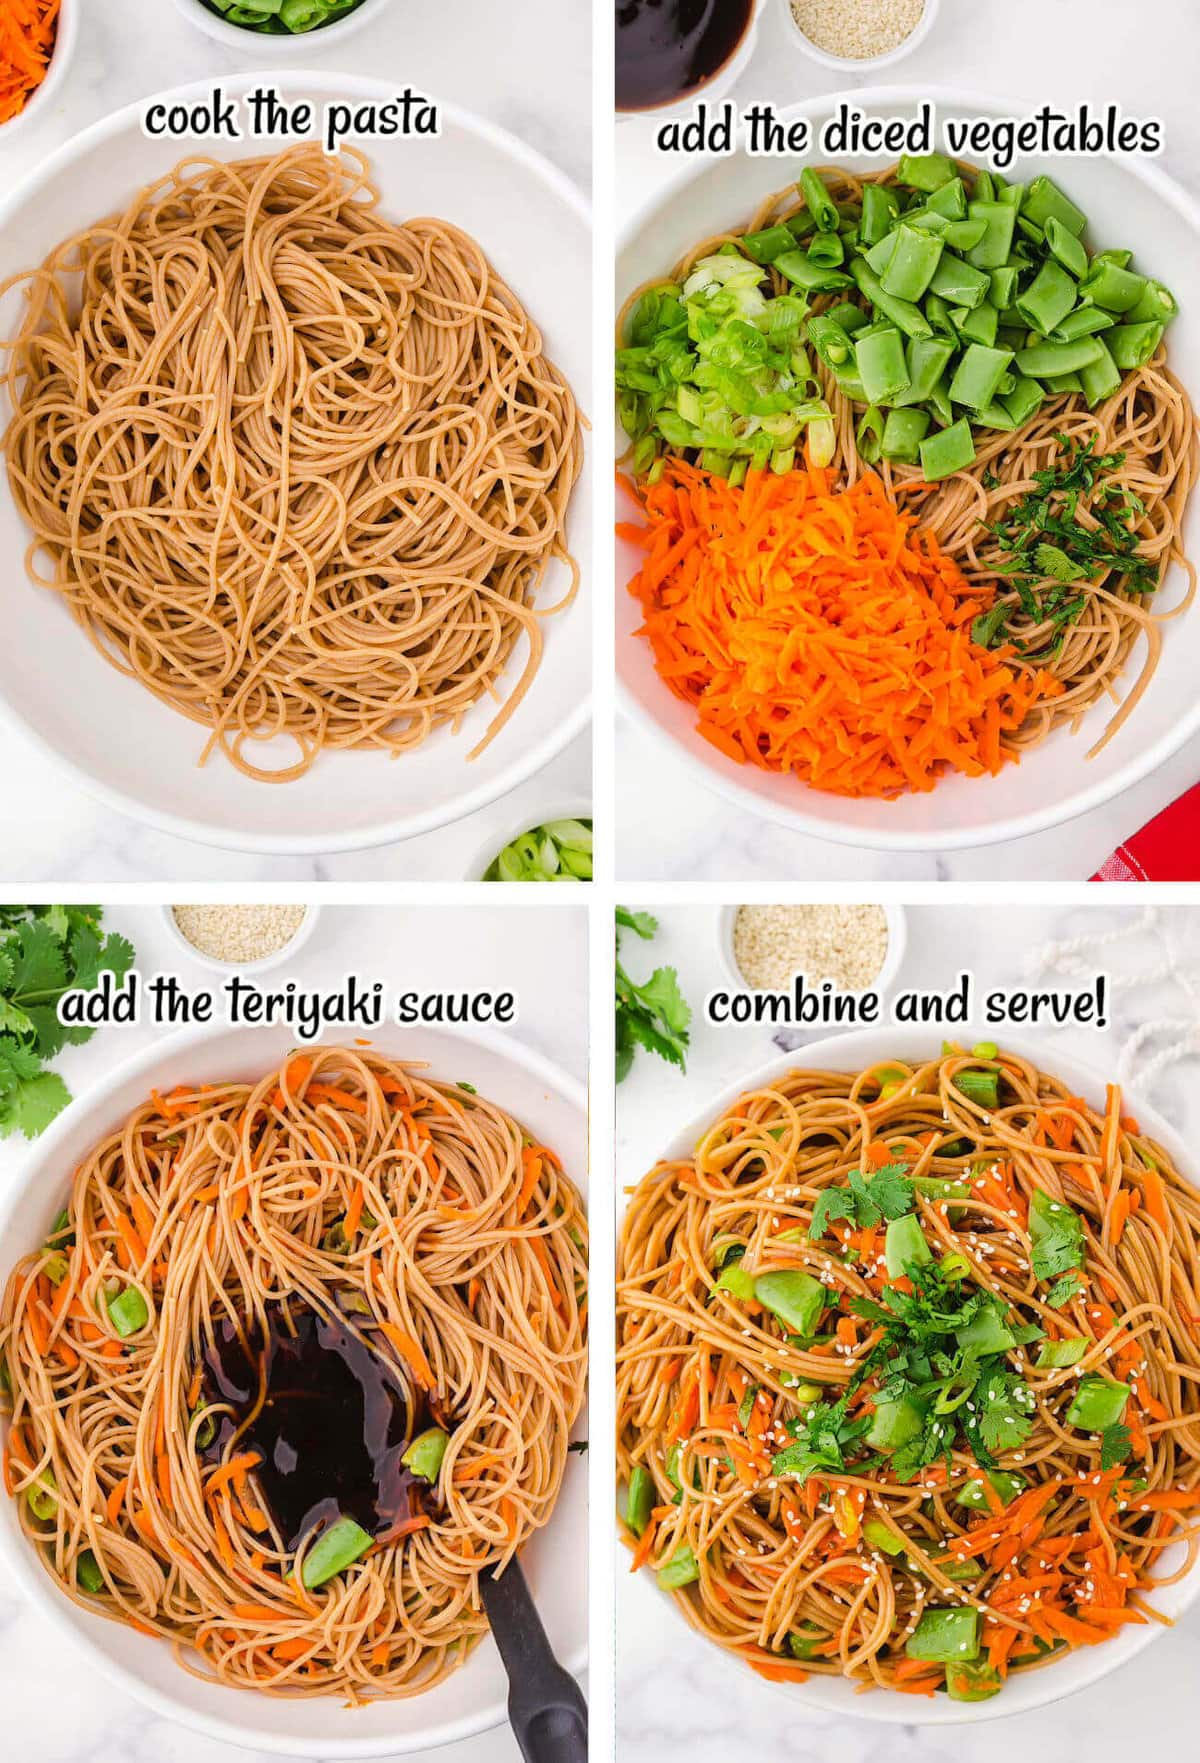 Step-by-step instructions on how to make the teriyaki noodles. With print overlay for clarification.